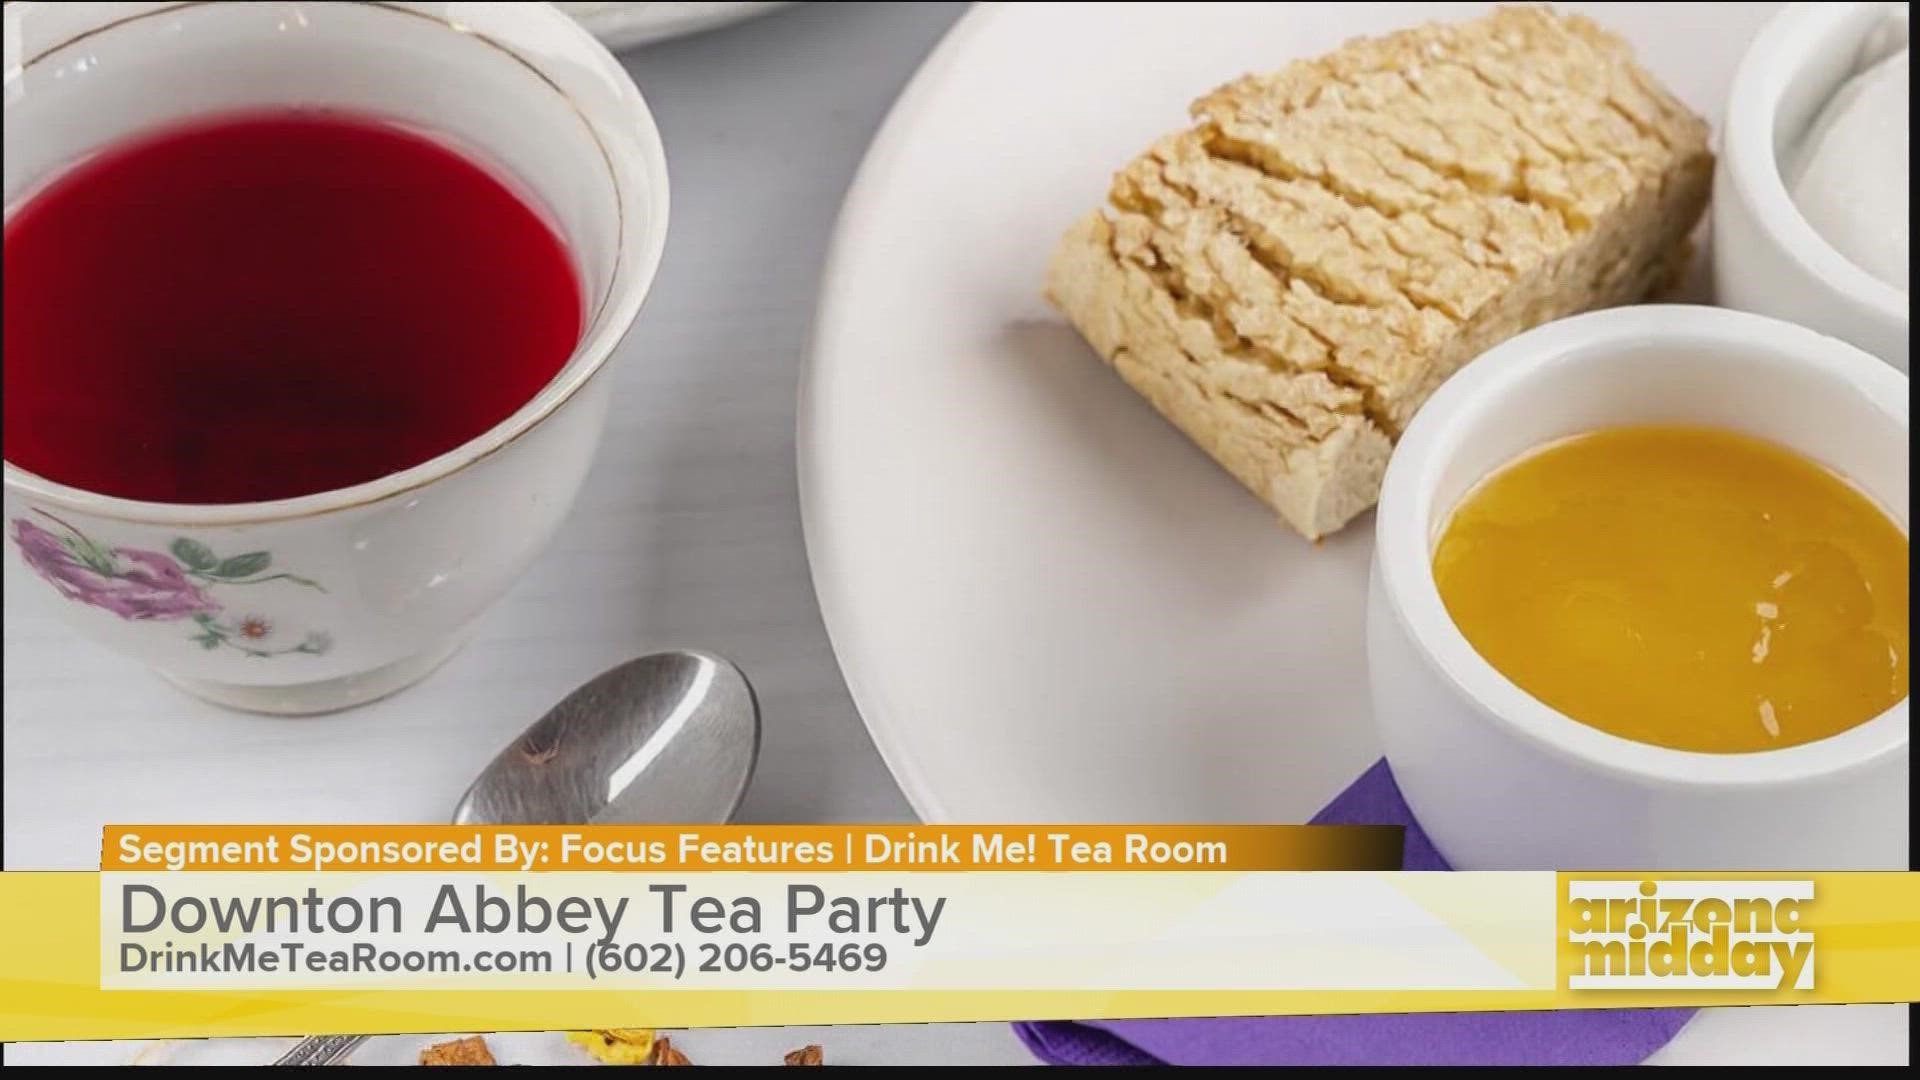 Melissa Harlan, from Drink Me! Tea Room, shares how you can have your own tea party plus the fun party ideas at her shop